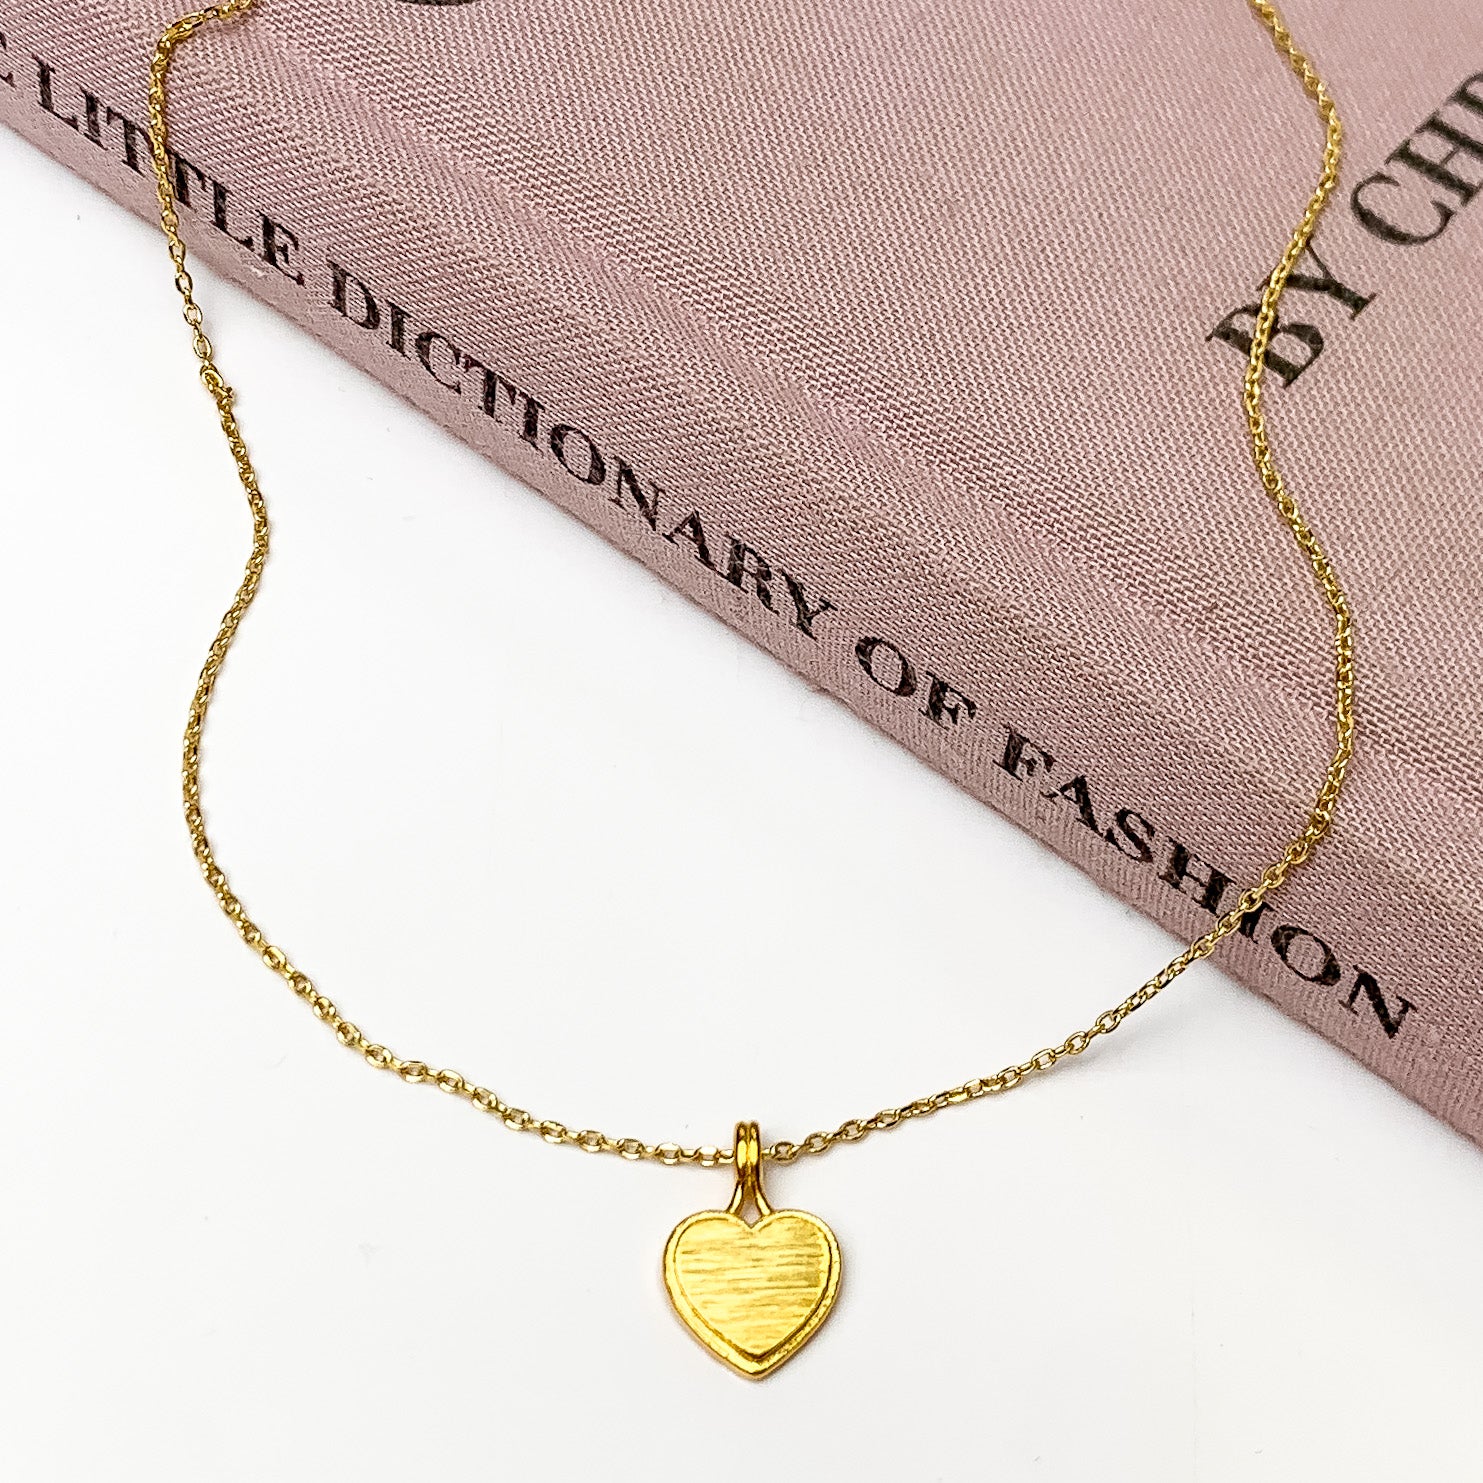 Gold Tone Necklace With Heart Charm. Pictured on a white background with the necklace laying on a book.